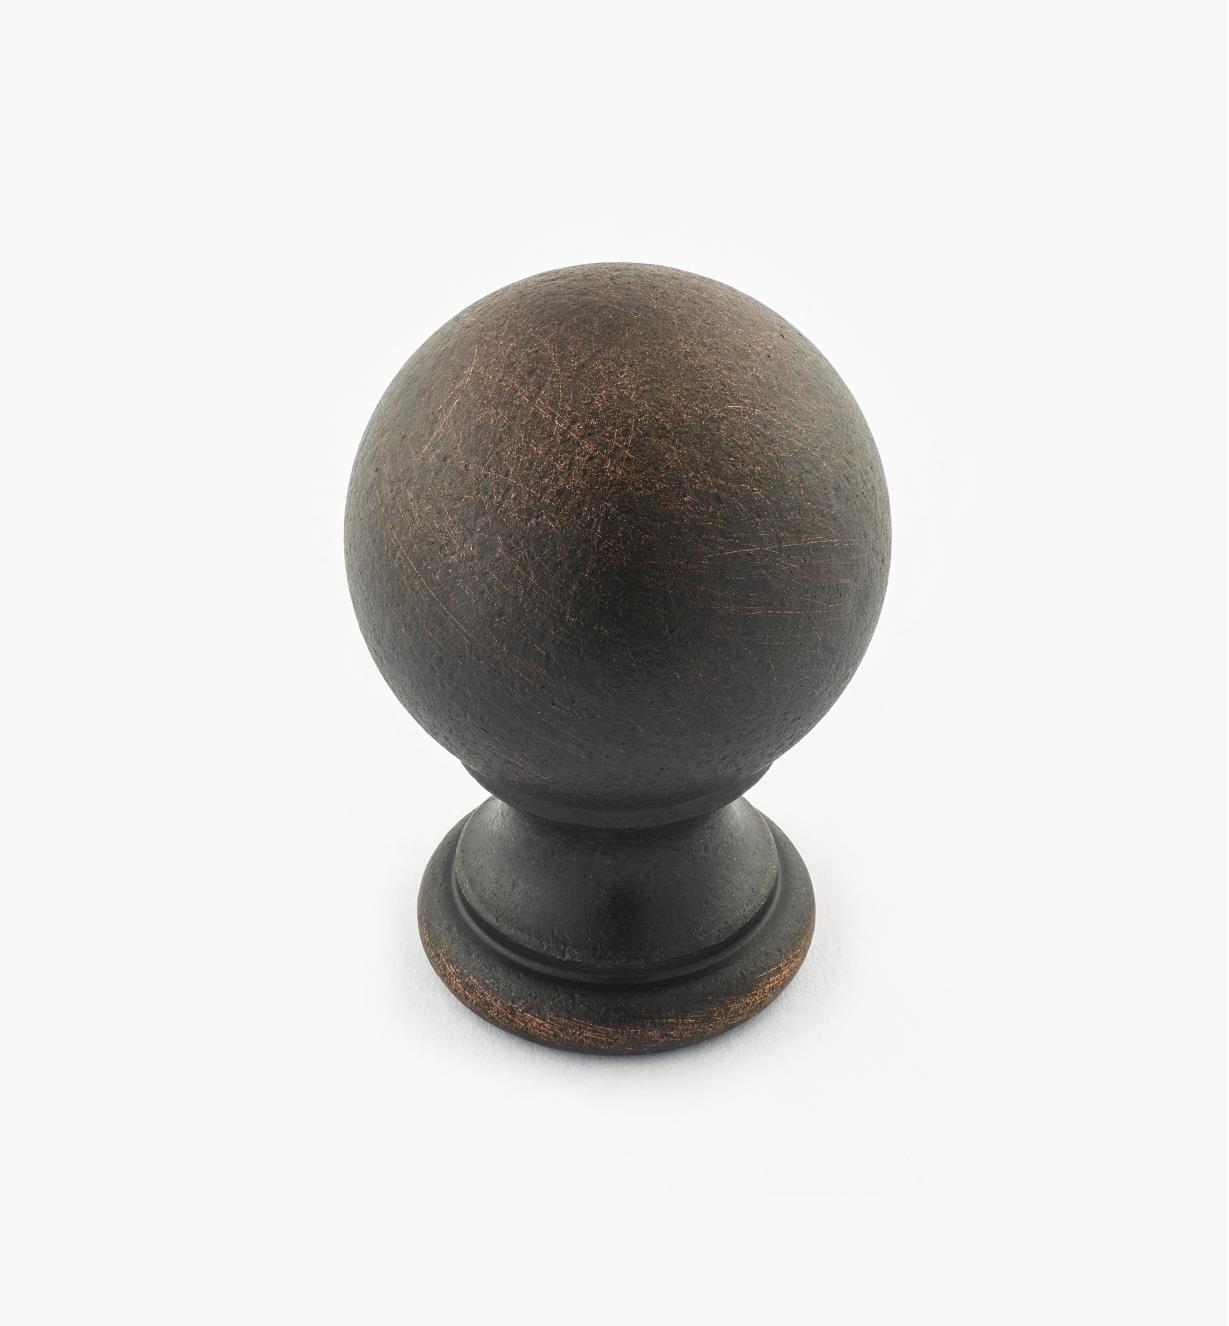 Polished Clear Coated Finish 1-1/4 Ball Diameter 3/4 Base Diameter 1-1/8 Projection Rockwood Manufacturing Company 1-1/4 Ball Diameter 1-1/8 Projection 3/4 Base Diameter Rockwood 841.3 Brass Ball Knob 